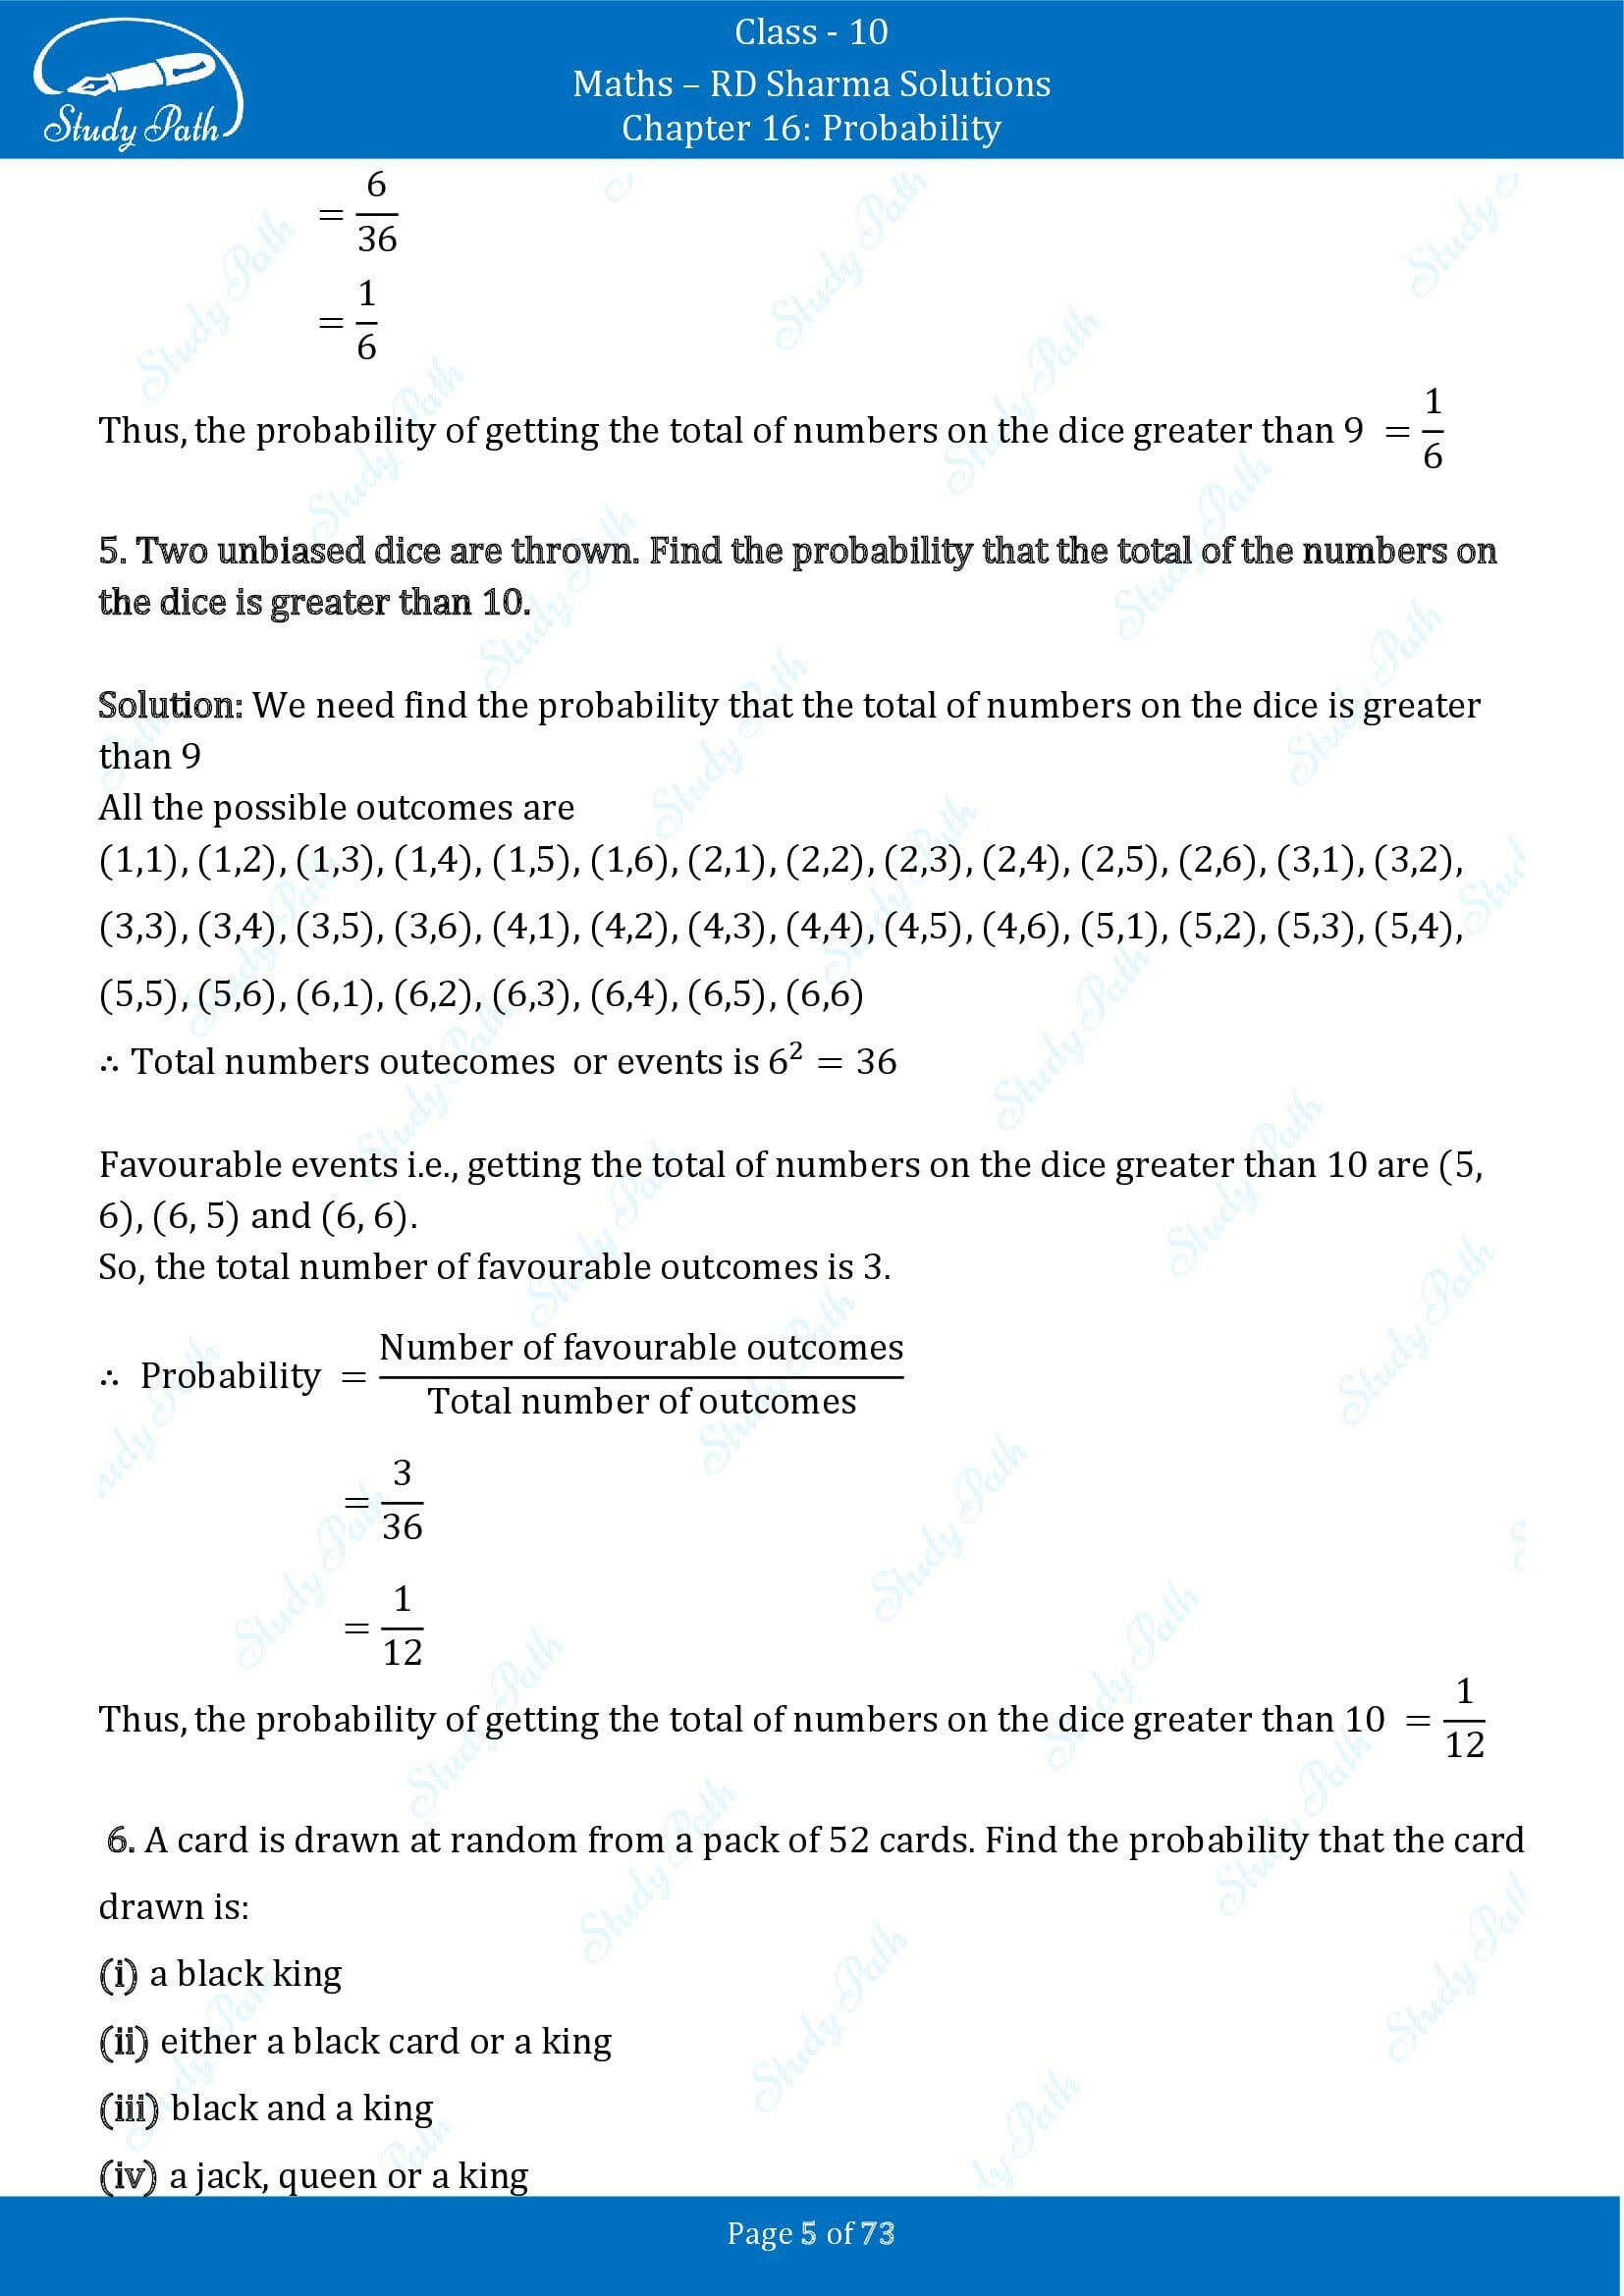 RD Sharma Solutions Class 10 Chapter 16 Probability Exercise 16.1 00005